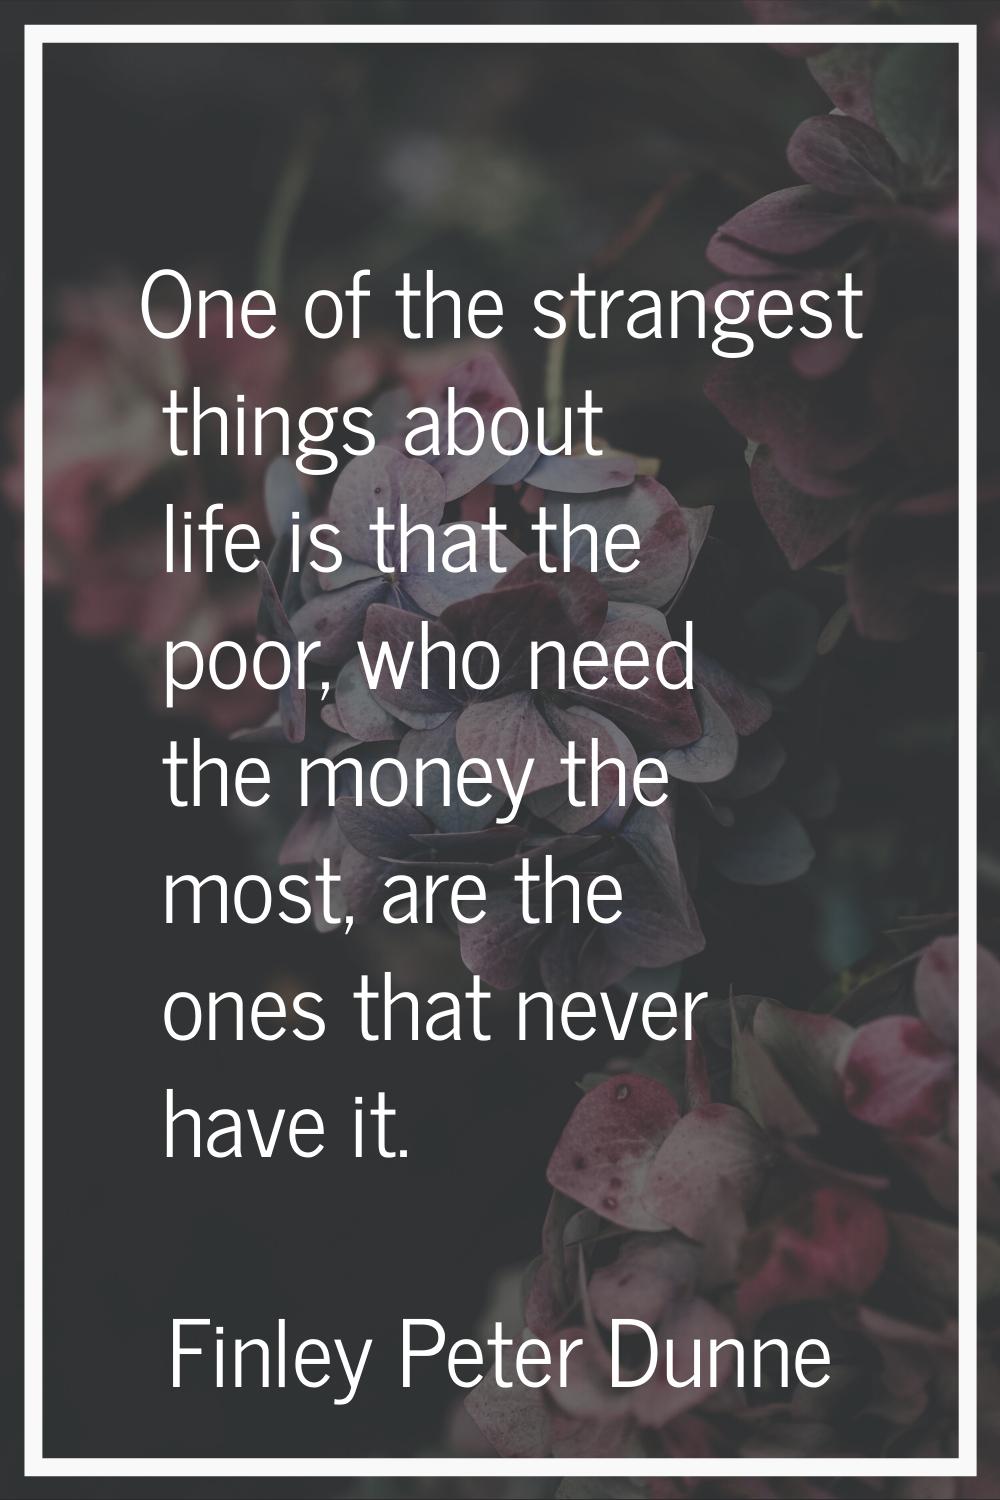 One of the strangest things about life is that the poor, who need the money the most, are the ones 